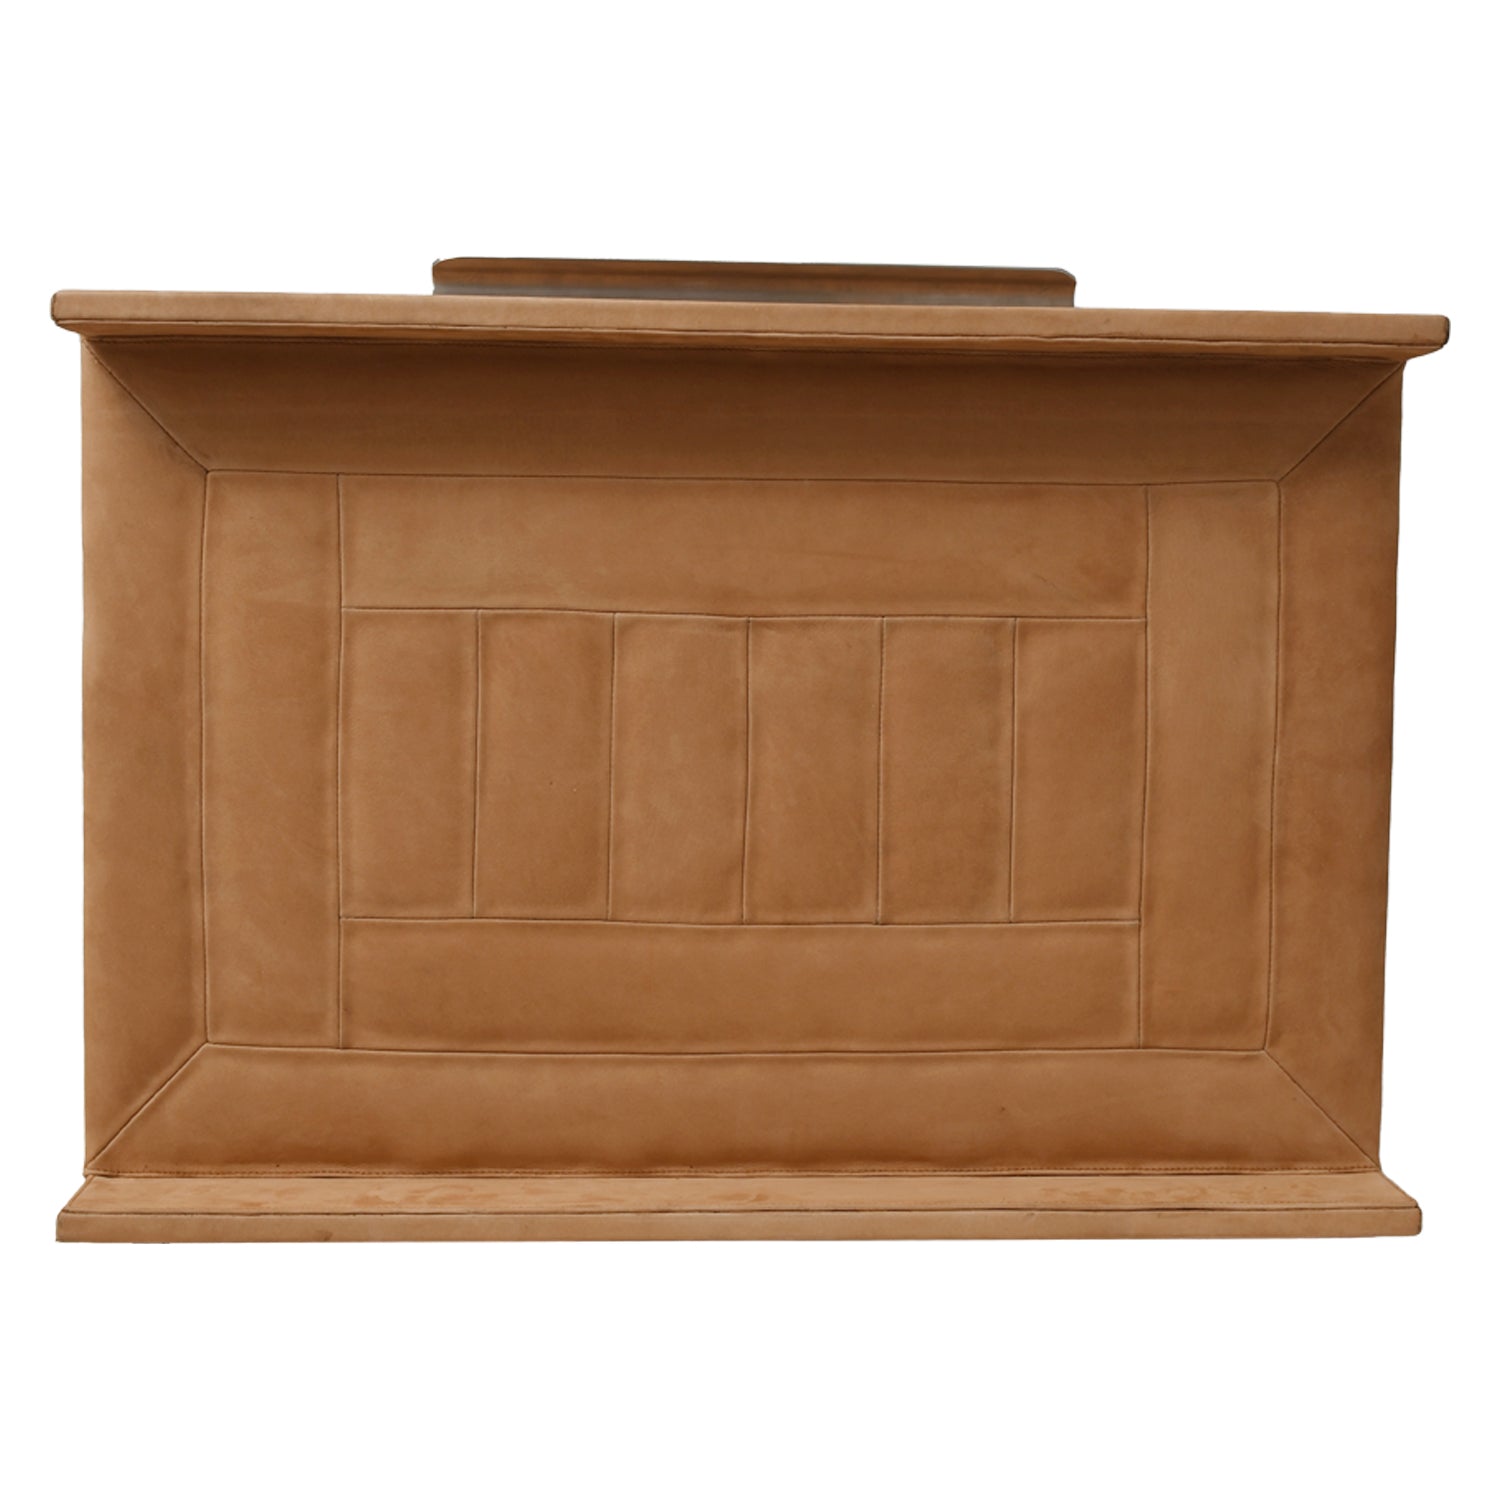 Tan Nubuck Leather Wrapped Tray Standing